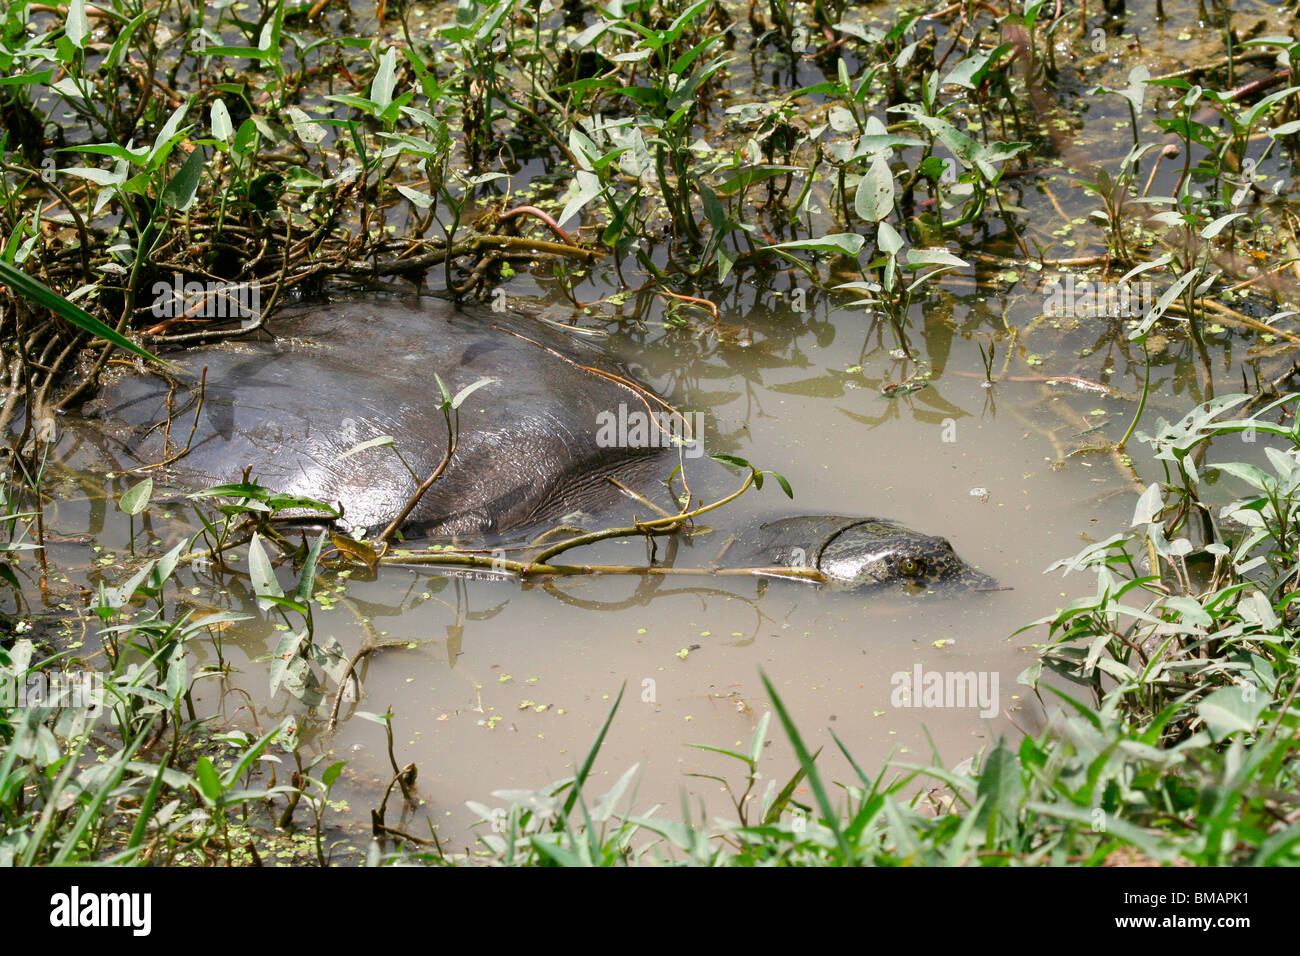 Ganges Soft Shelled Turtle (Aspideretes Gangeticus) in a lake in Bharatpur Bird Sanctuary (Keoladeo Ghana National Park), India Stock Photo